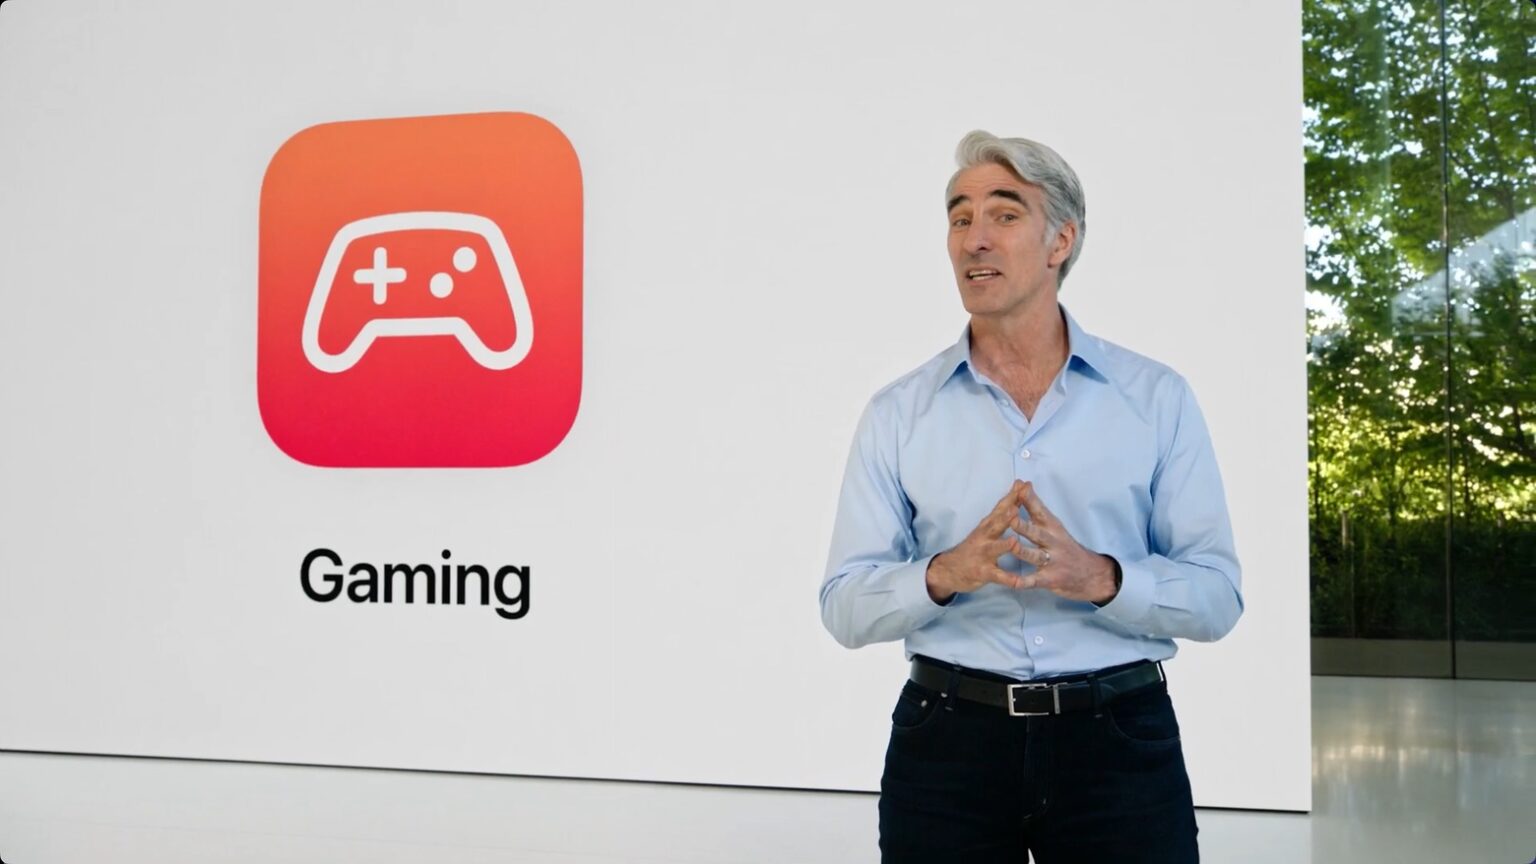 Apple makes a play for gamers with Metal 3 and more game controller support